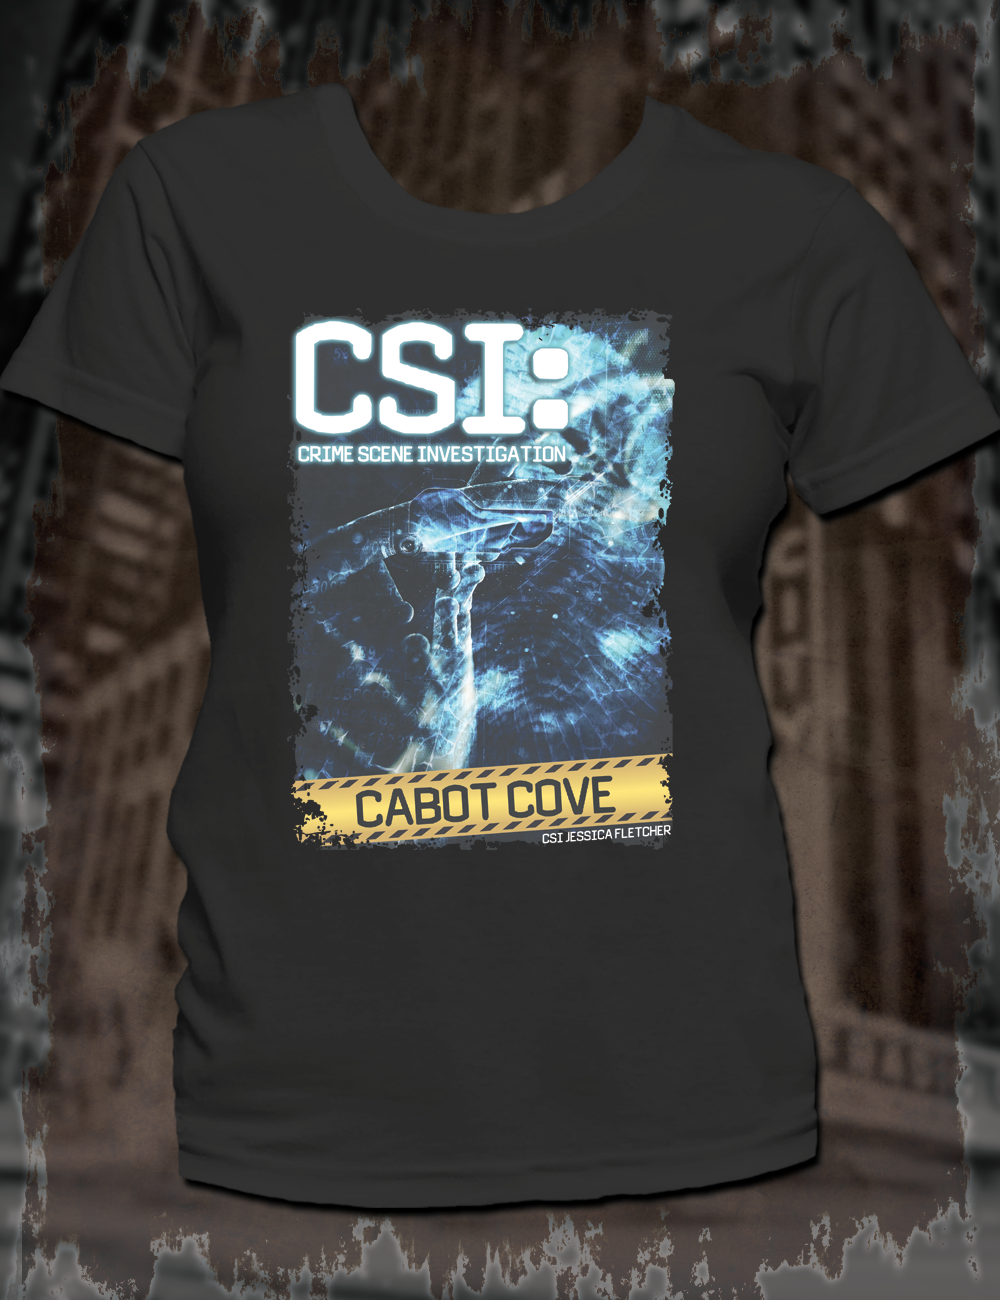 Personalise Your Own CSI T-Shirt - Hellwood Outfitters